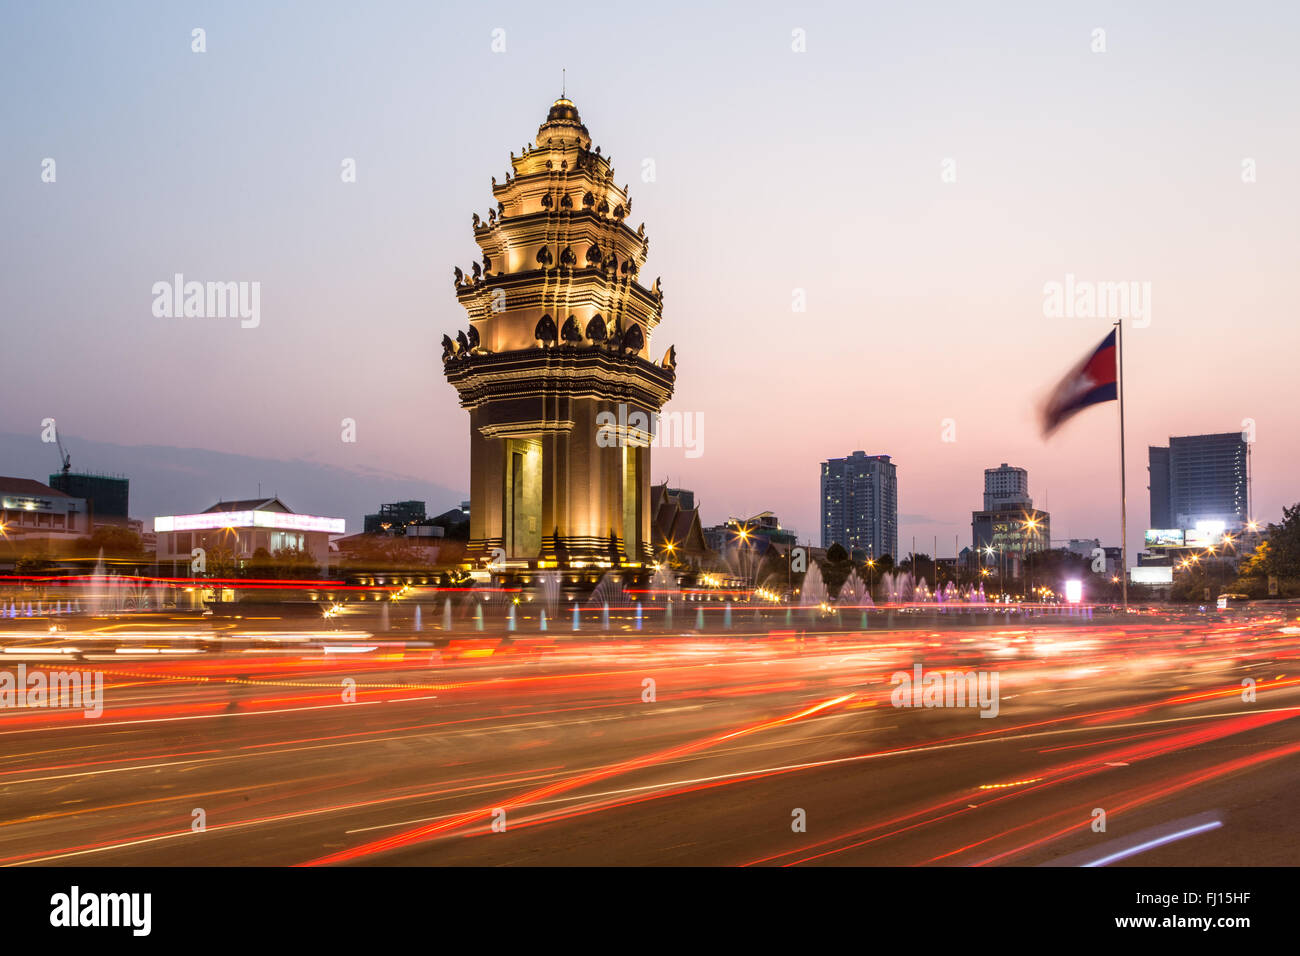 Traffic rush around the Independence monument, with its Khmer architecture style, in Phnom Penh, Cambodia capital city. Blurred Stock Photo